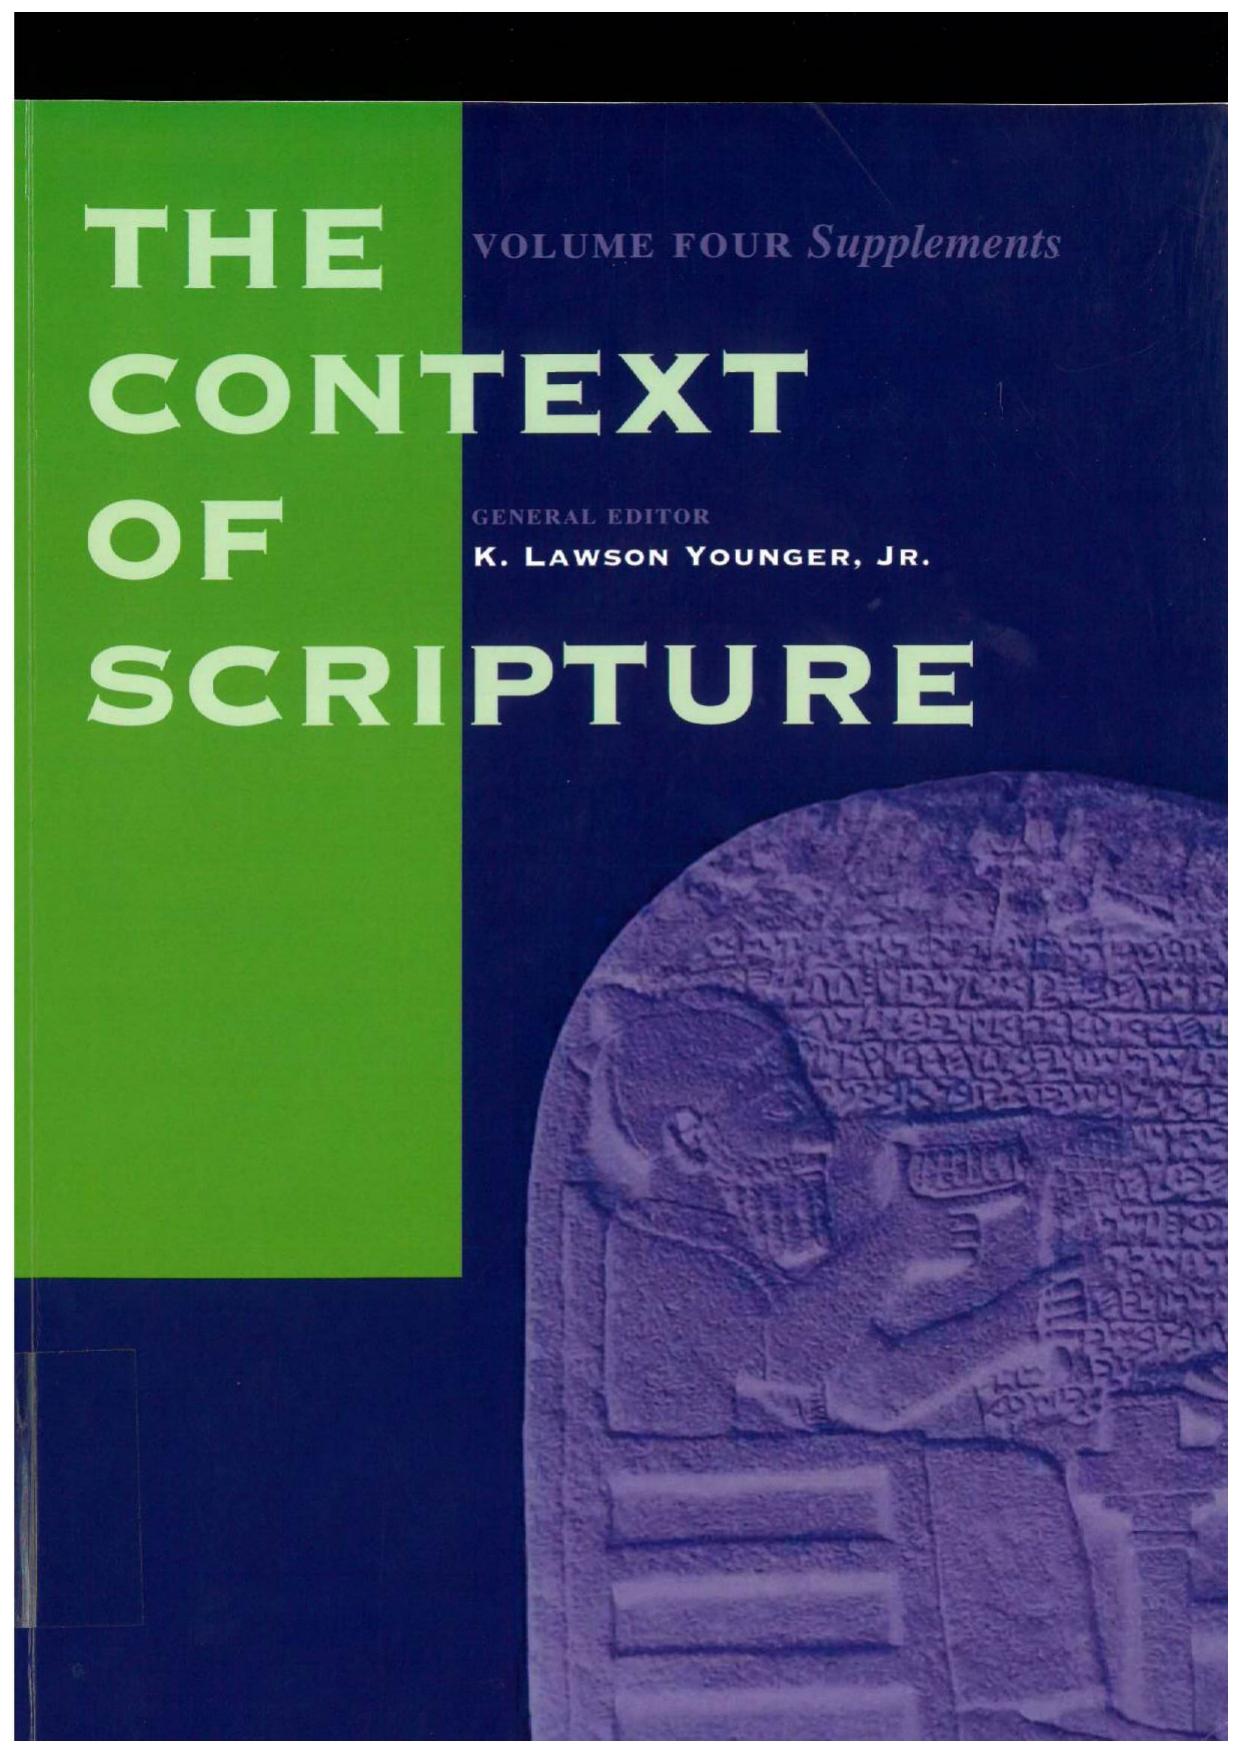 The Context of Scripture Volume 4 by K. Lawson Younger Jr